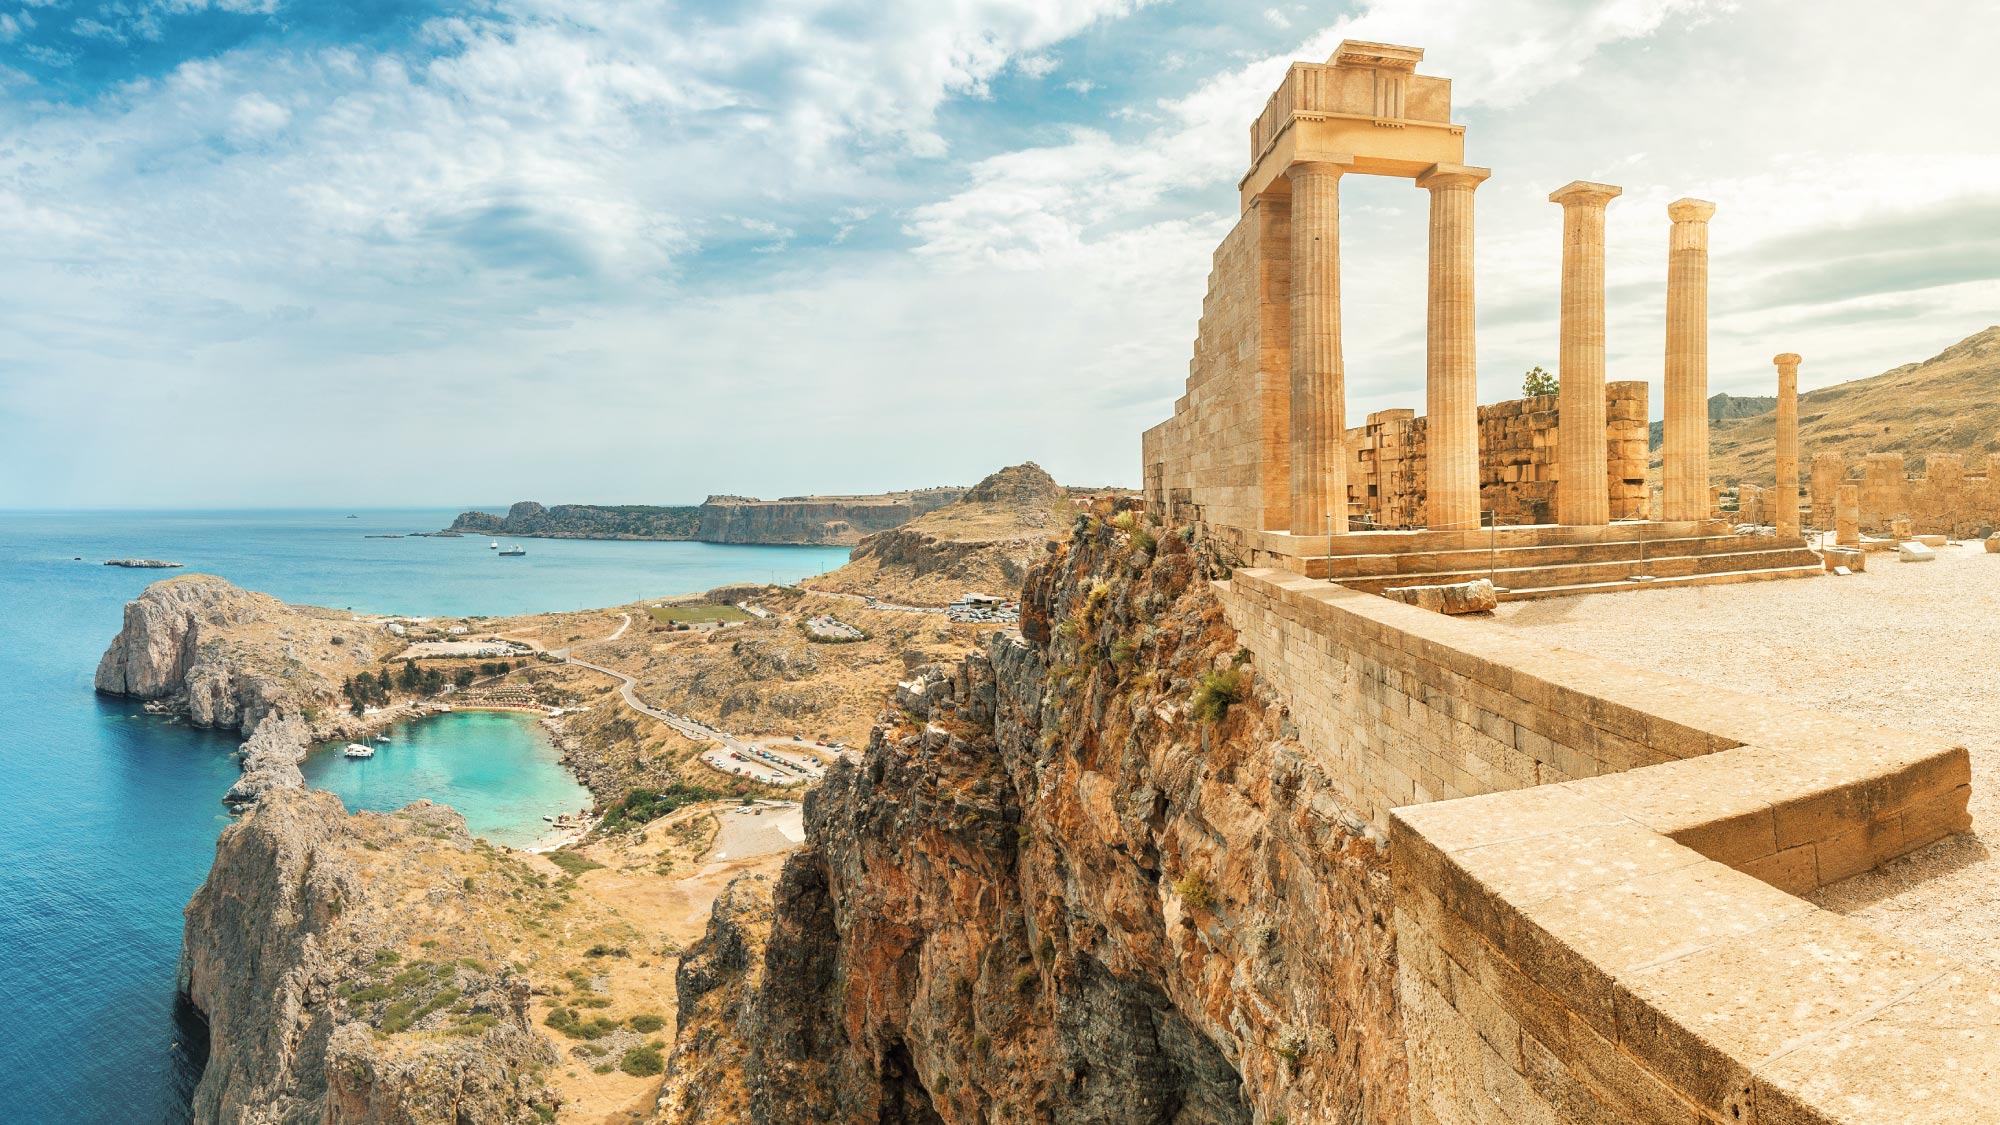 Capture the allure of Rhodes in Greece, a captivating stop on the journey to Australia spanning 21 countries, tailored for self-flying pilots. Immerse yourself in the island's rich history and picturesque landscapes as you explore this enchanting Mediterranean destination.